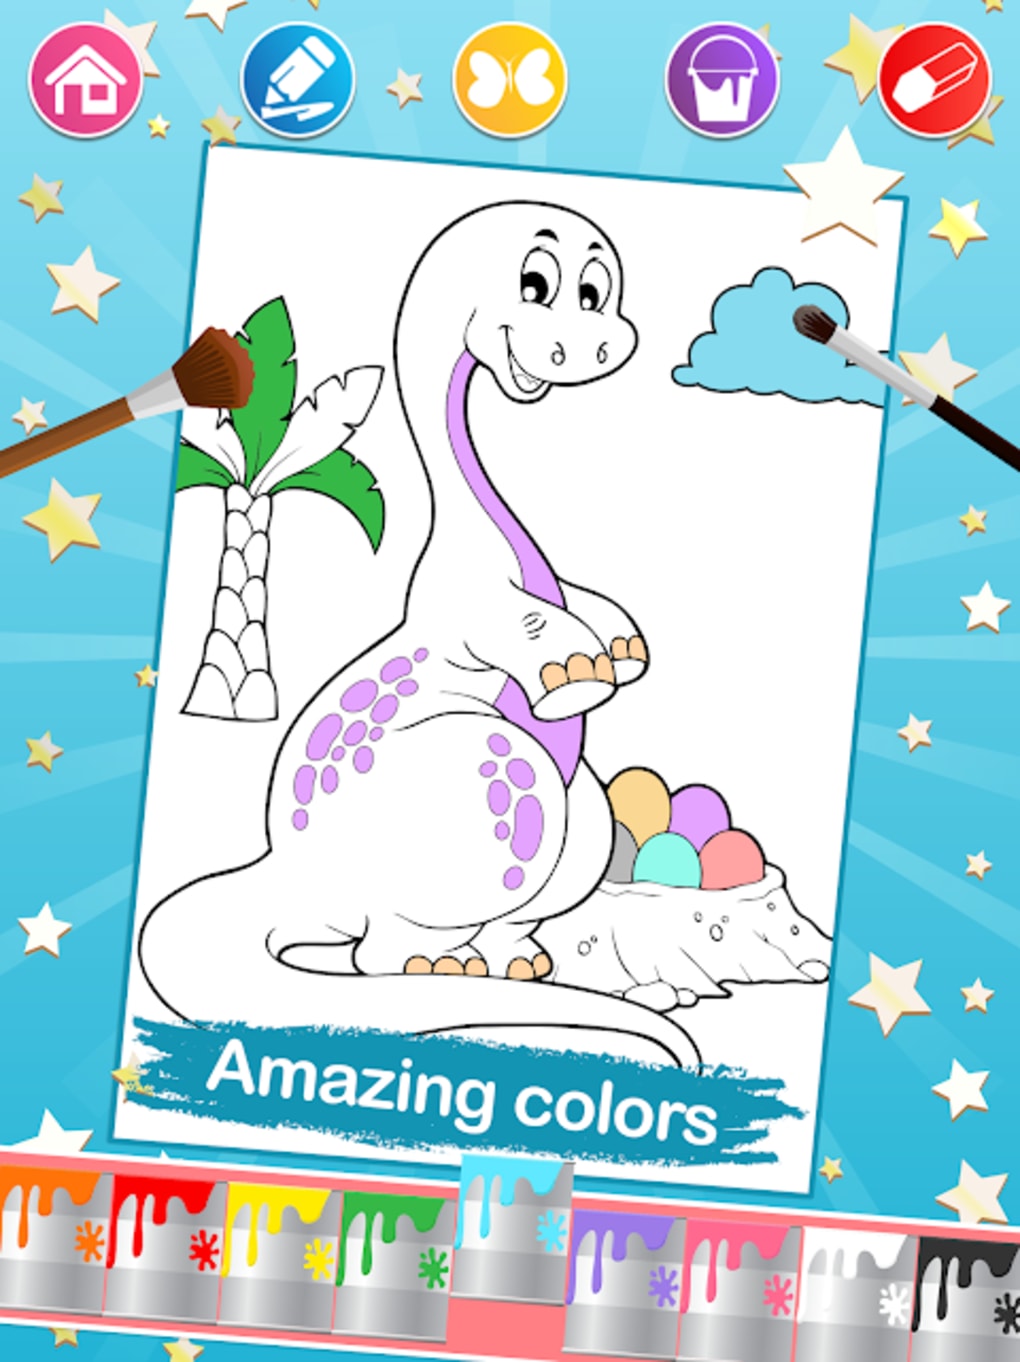 dino-coloring-pages-android